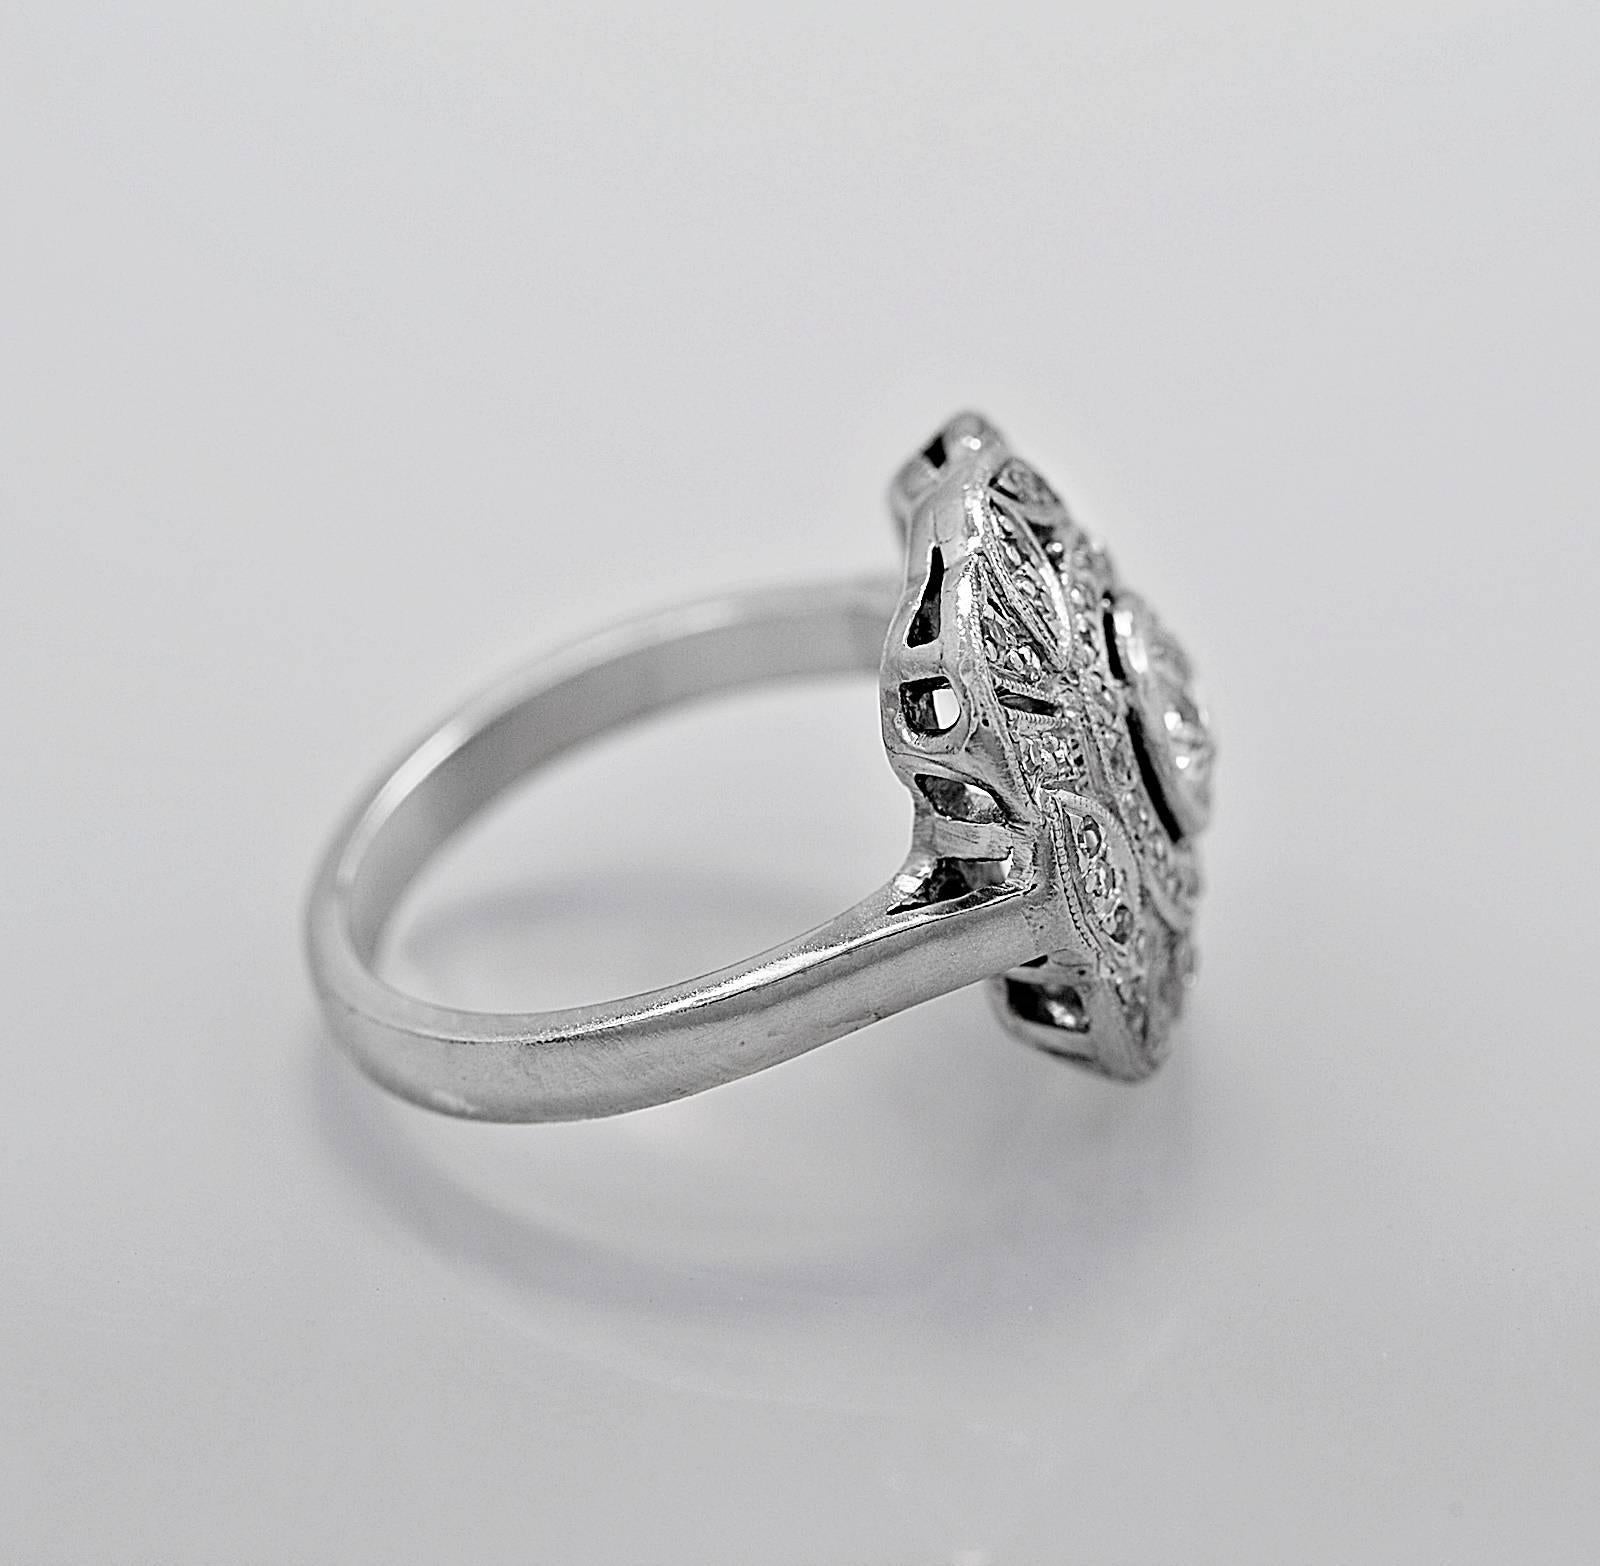 This is an original platinum Art Deco antique engagement ring - fashion ring featuring a center .60ct. apx. round European diamond with SI1 clarity and J color. The detailed filigree is accented with .25ct. apx. T.W. of round single cuts with G-H